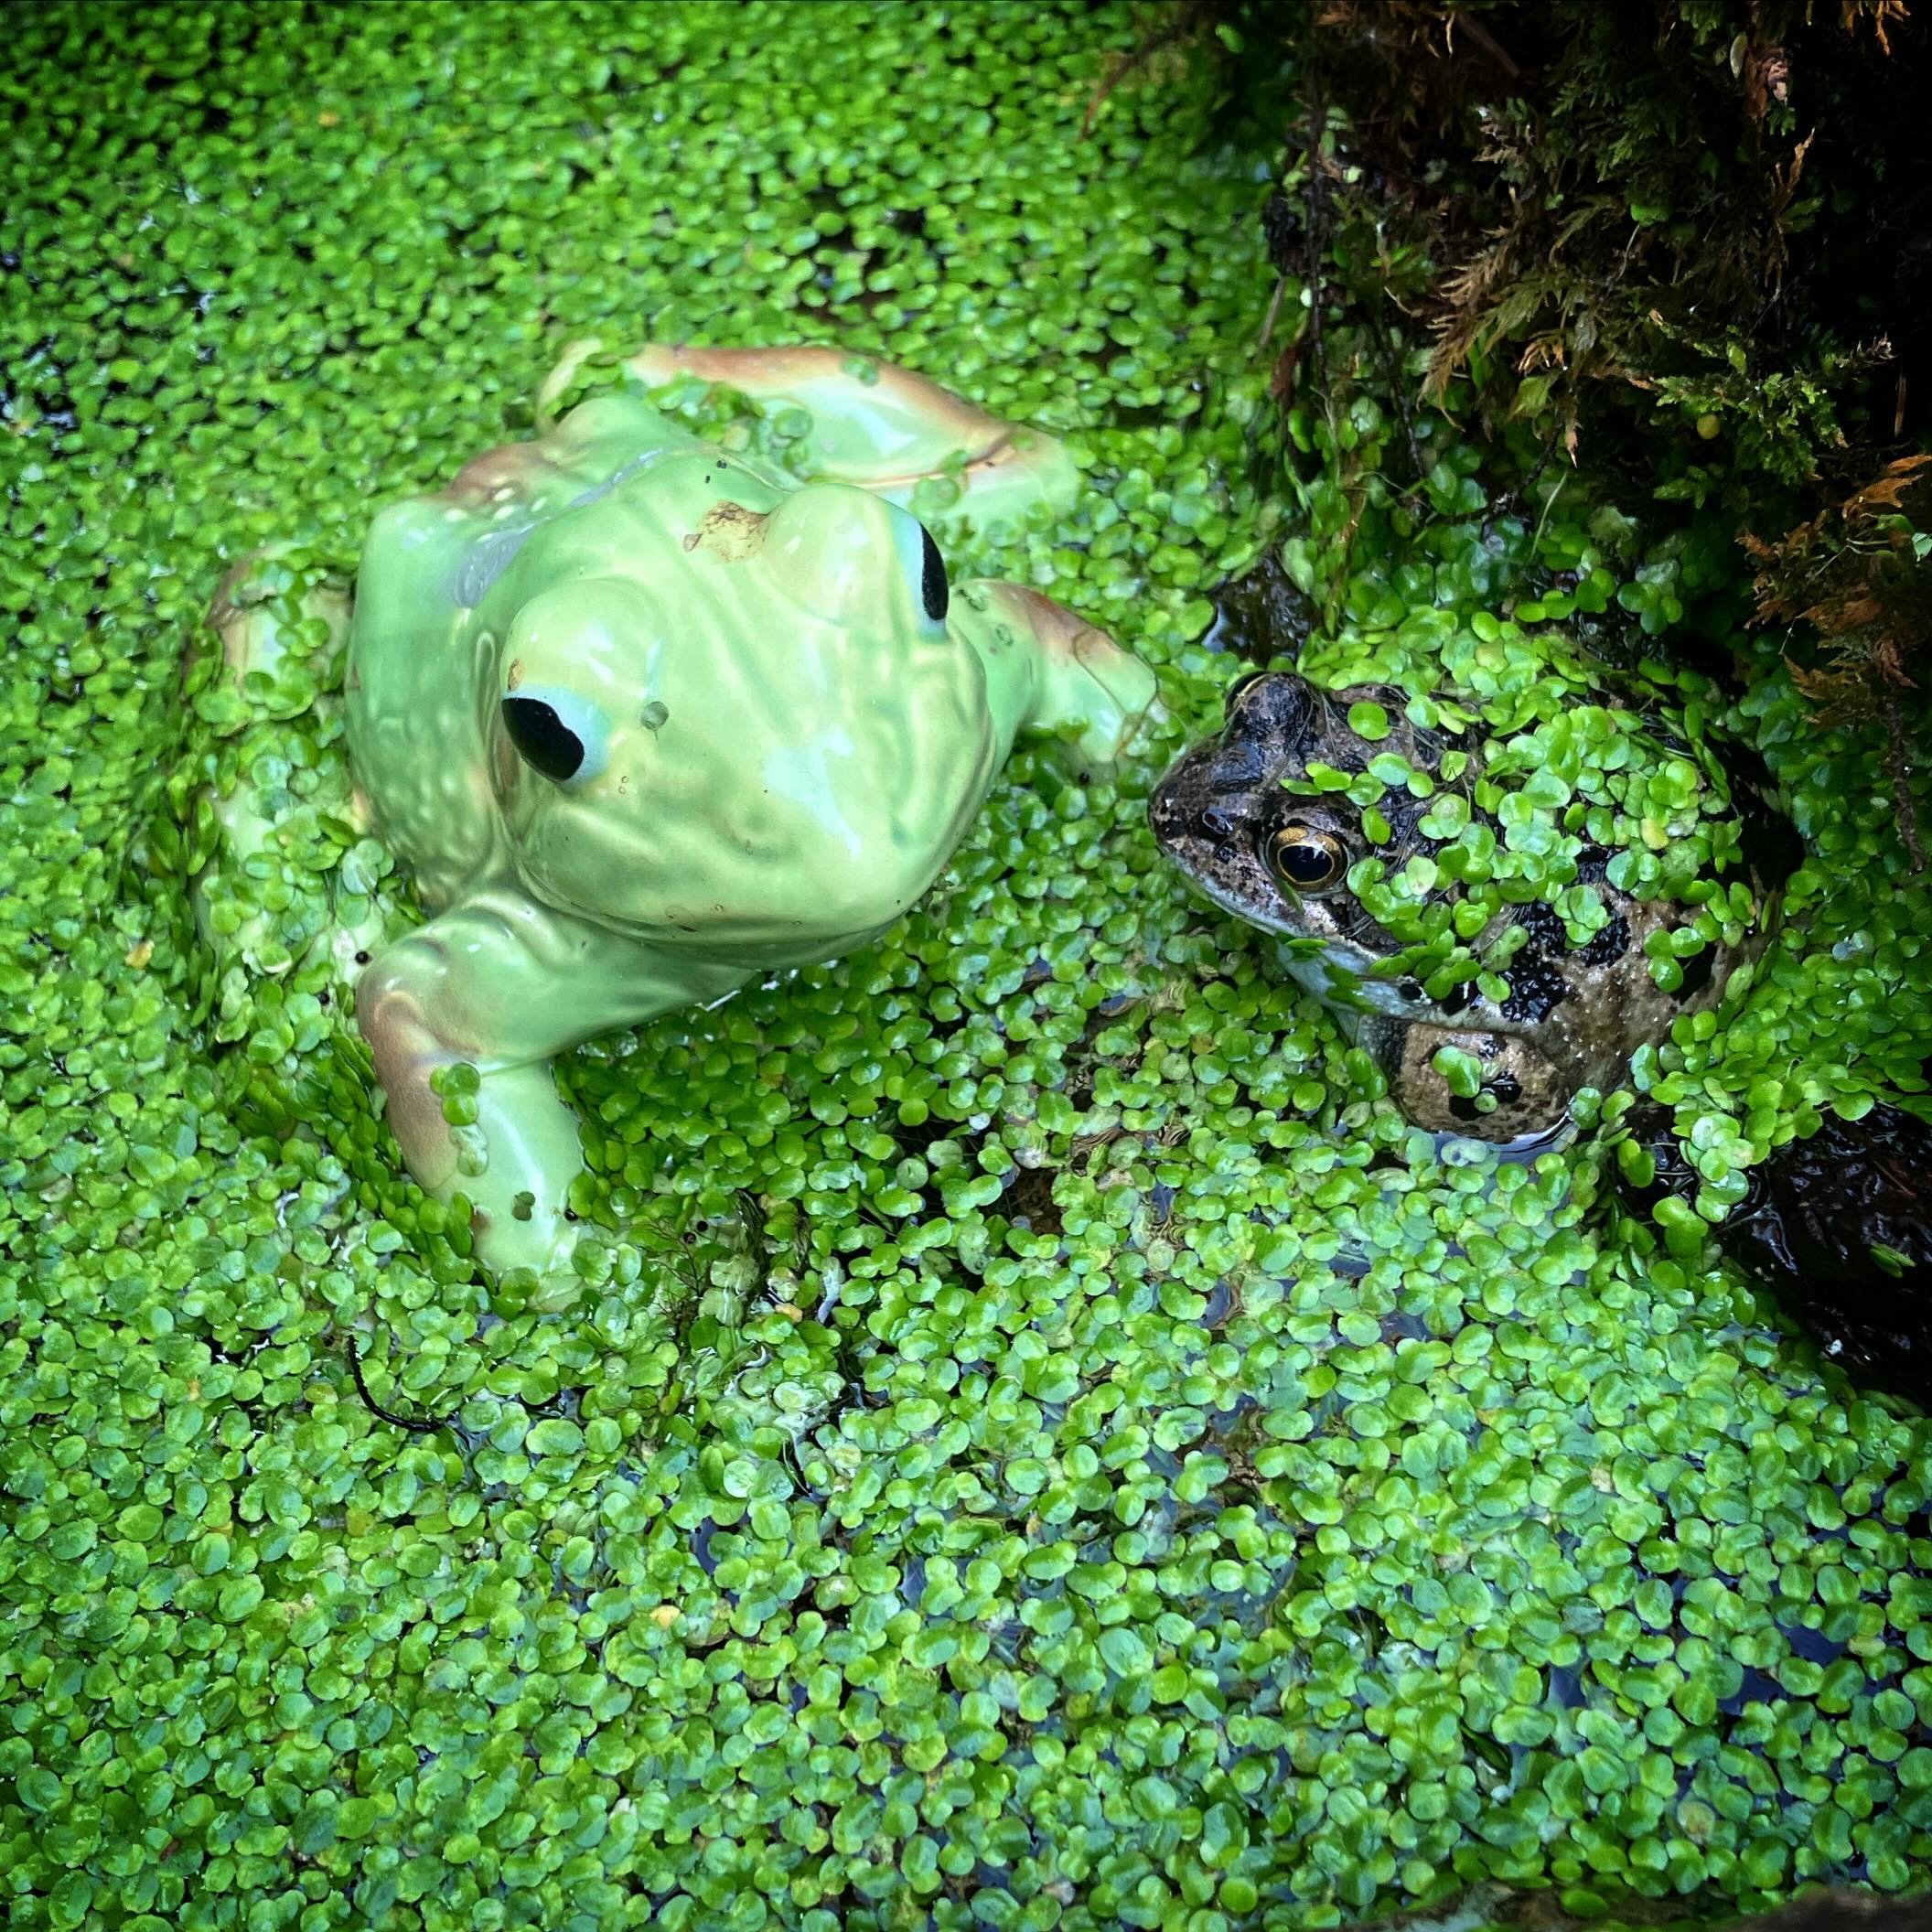 Two new friends in a tiny pond I came across today #osmosis_garden_design #frogfriend #gardenpond